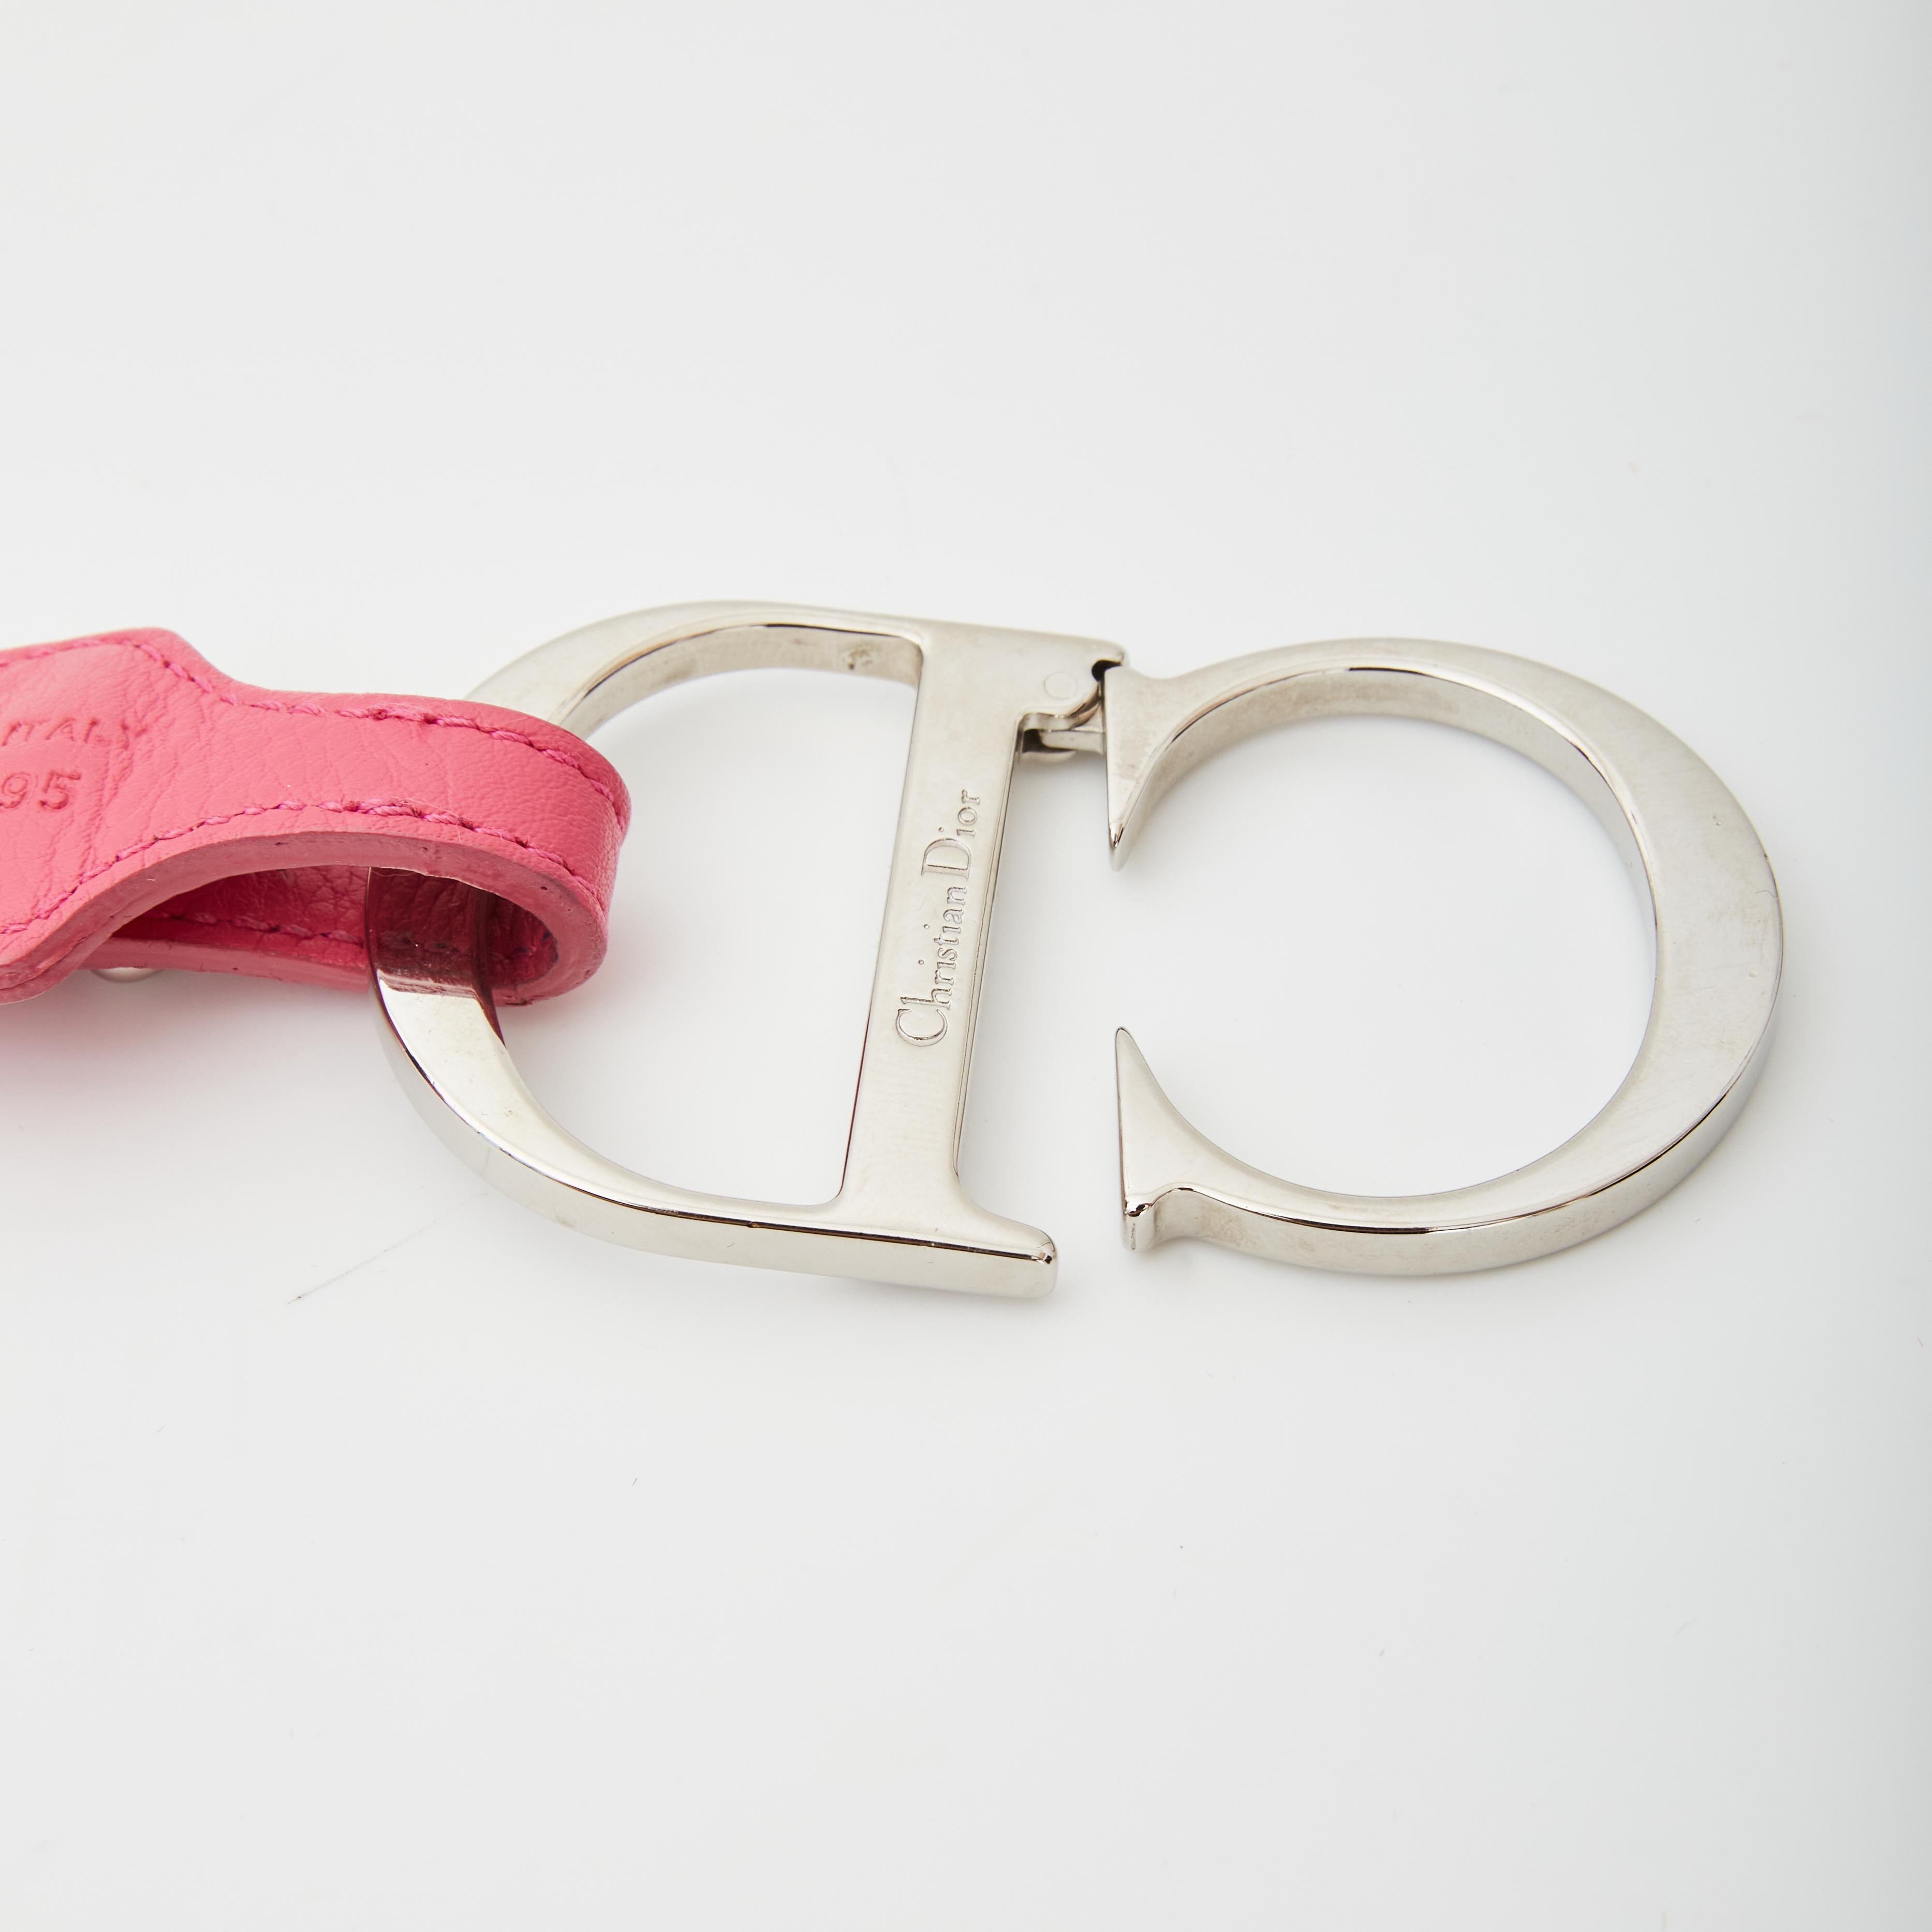 This vintage Dior belt from 2005 is made with pink leather and woven fabric and features a logo CD buckle in sliver tone with loop attachment and is adjustable from 27” to 38”.

COLOR: Pink
MATERIAL: Leather
DATE CODE: RE-0095
SIZE: Min 27” and Max